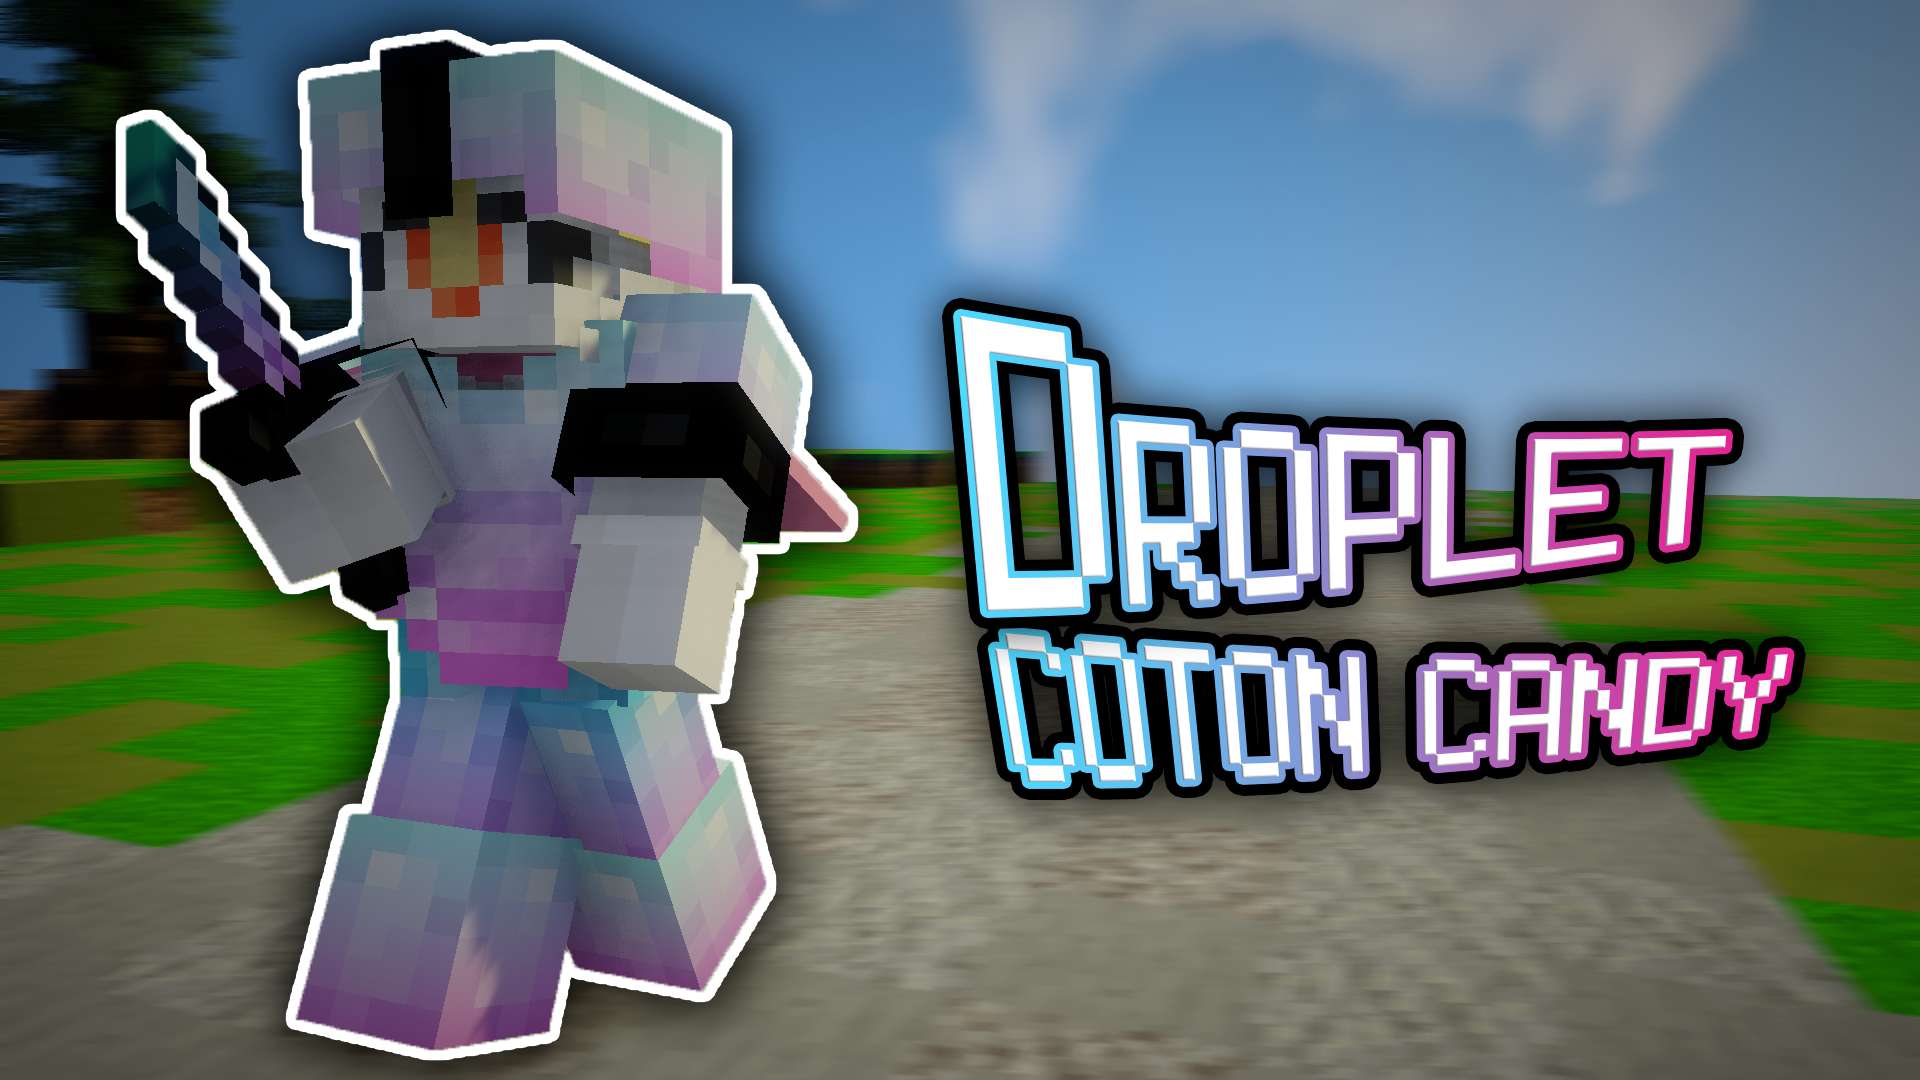 Droplet (Coton candy) 16x by Likorrne on PvPRP